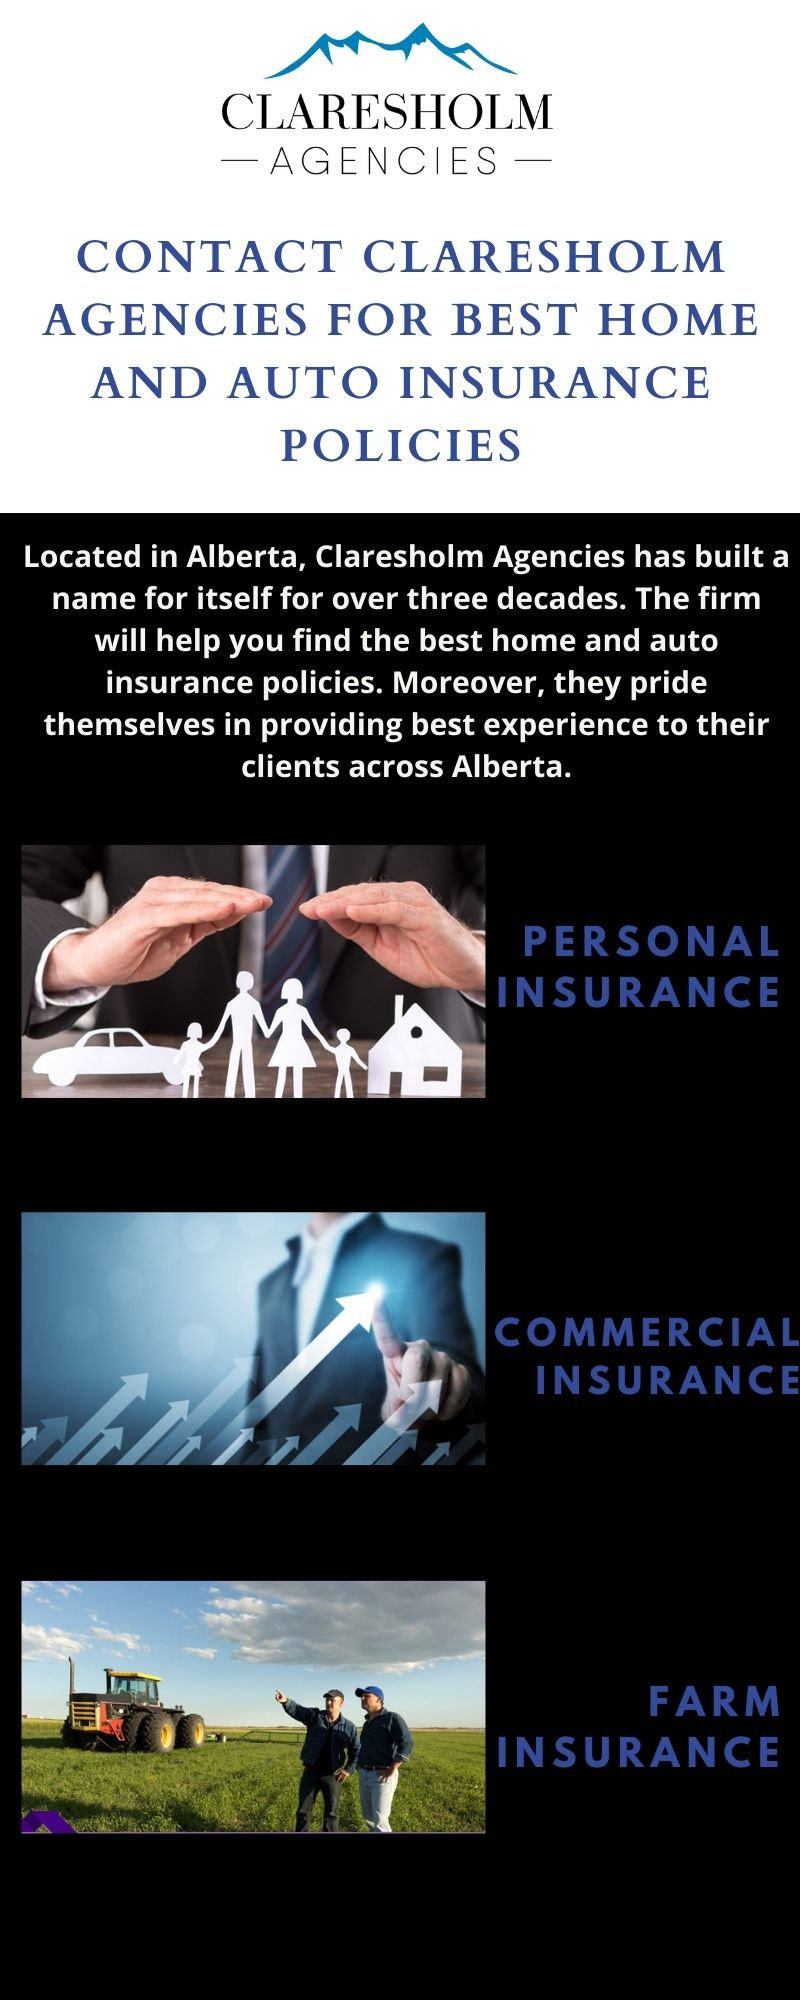 Contact Claresholm Agencies for Best Home and Auto Insurance Policies